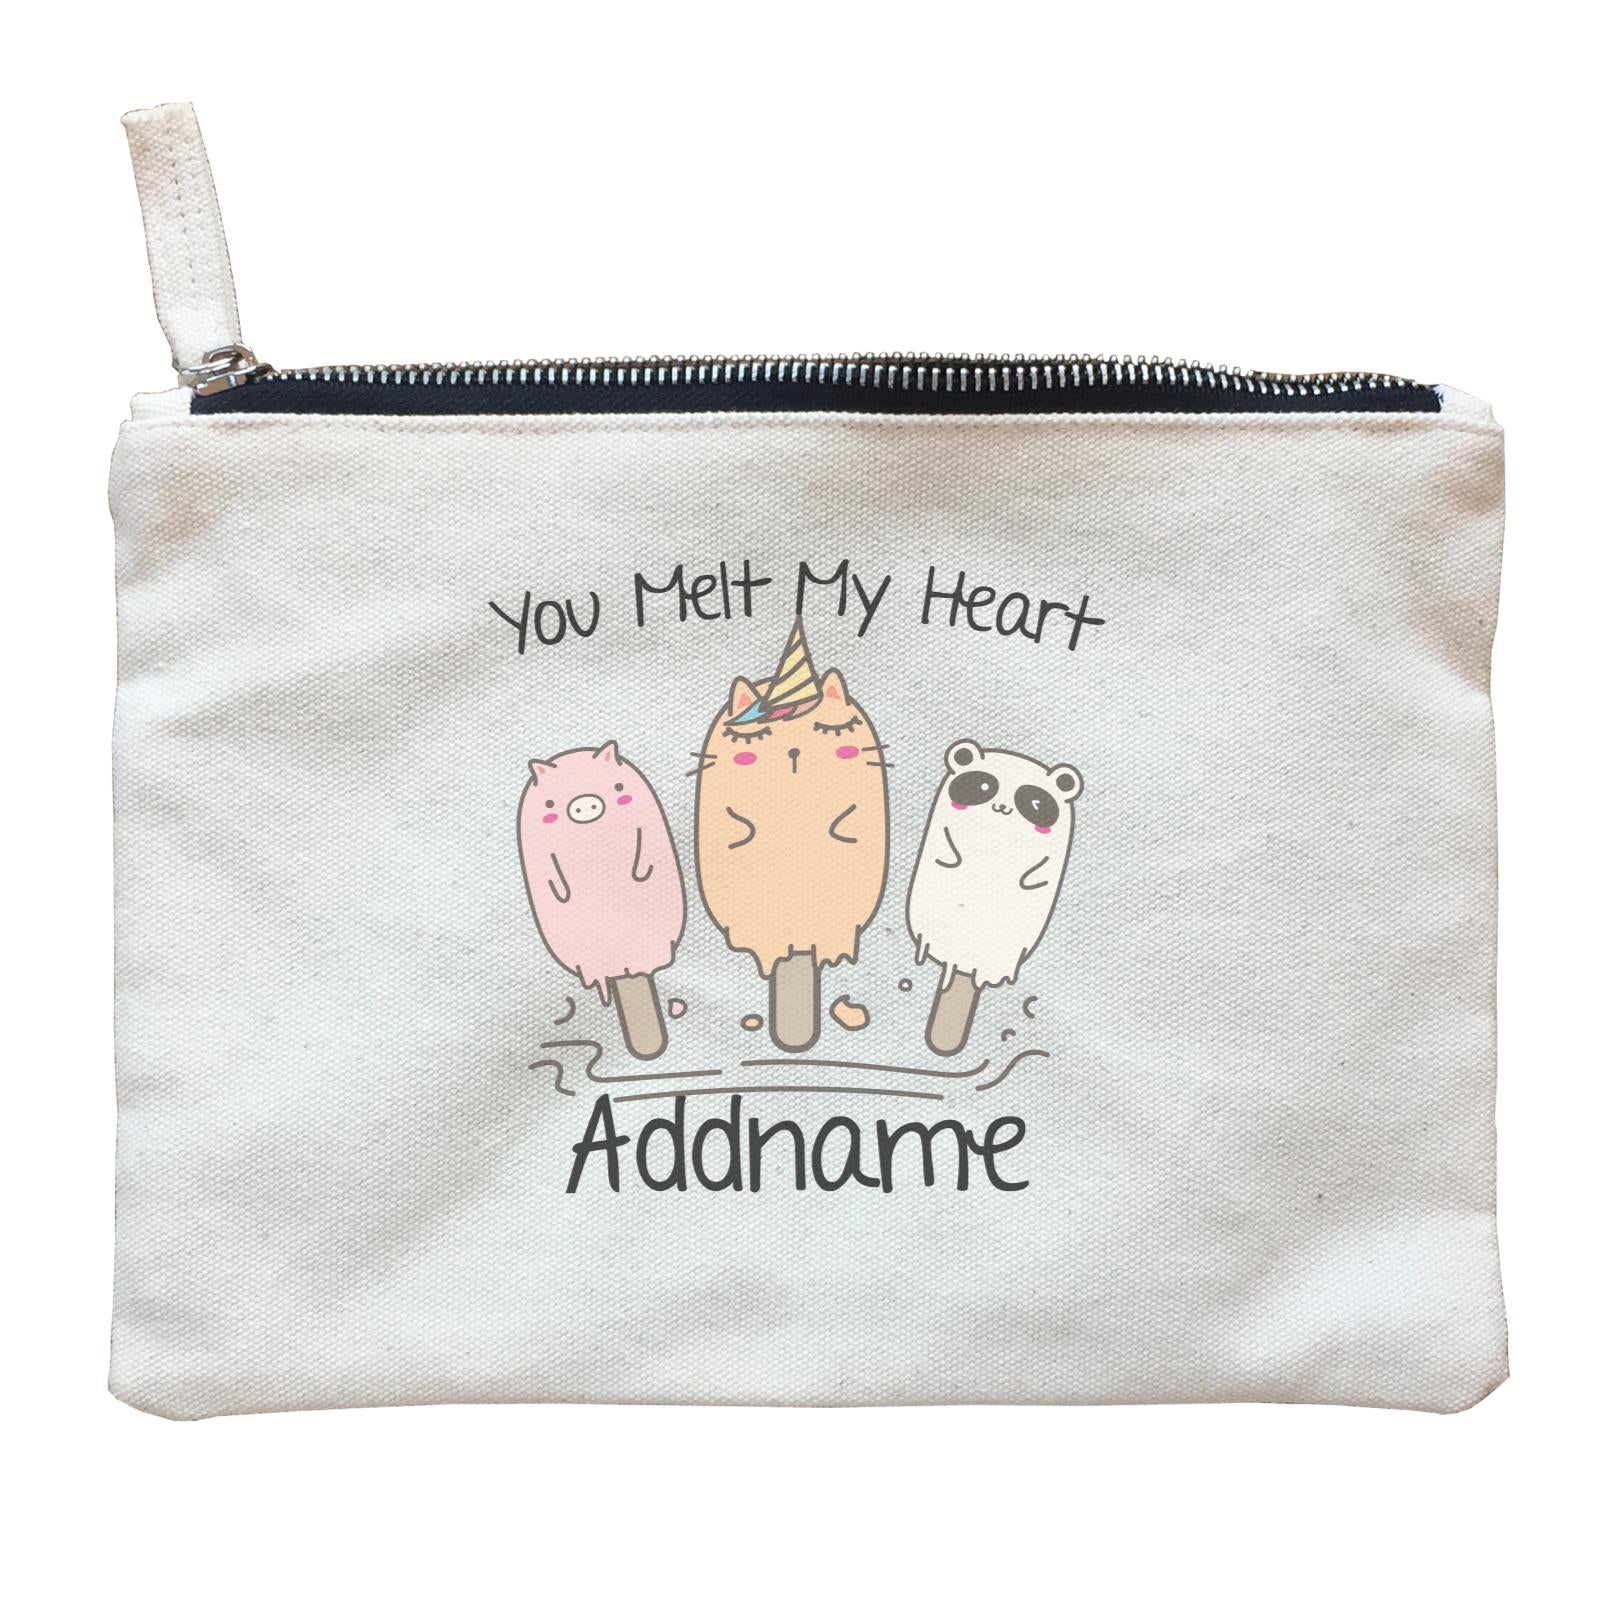 Cute Animals And Friends Series You Melt My Heart Animal Addname Zipper Pouch